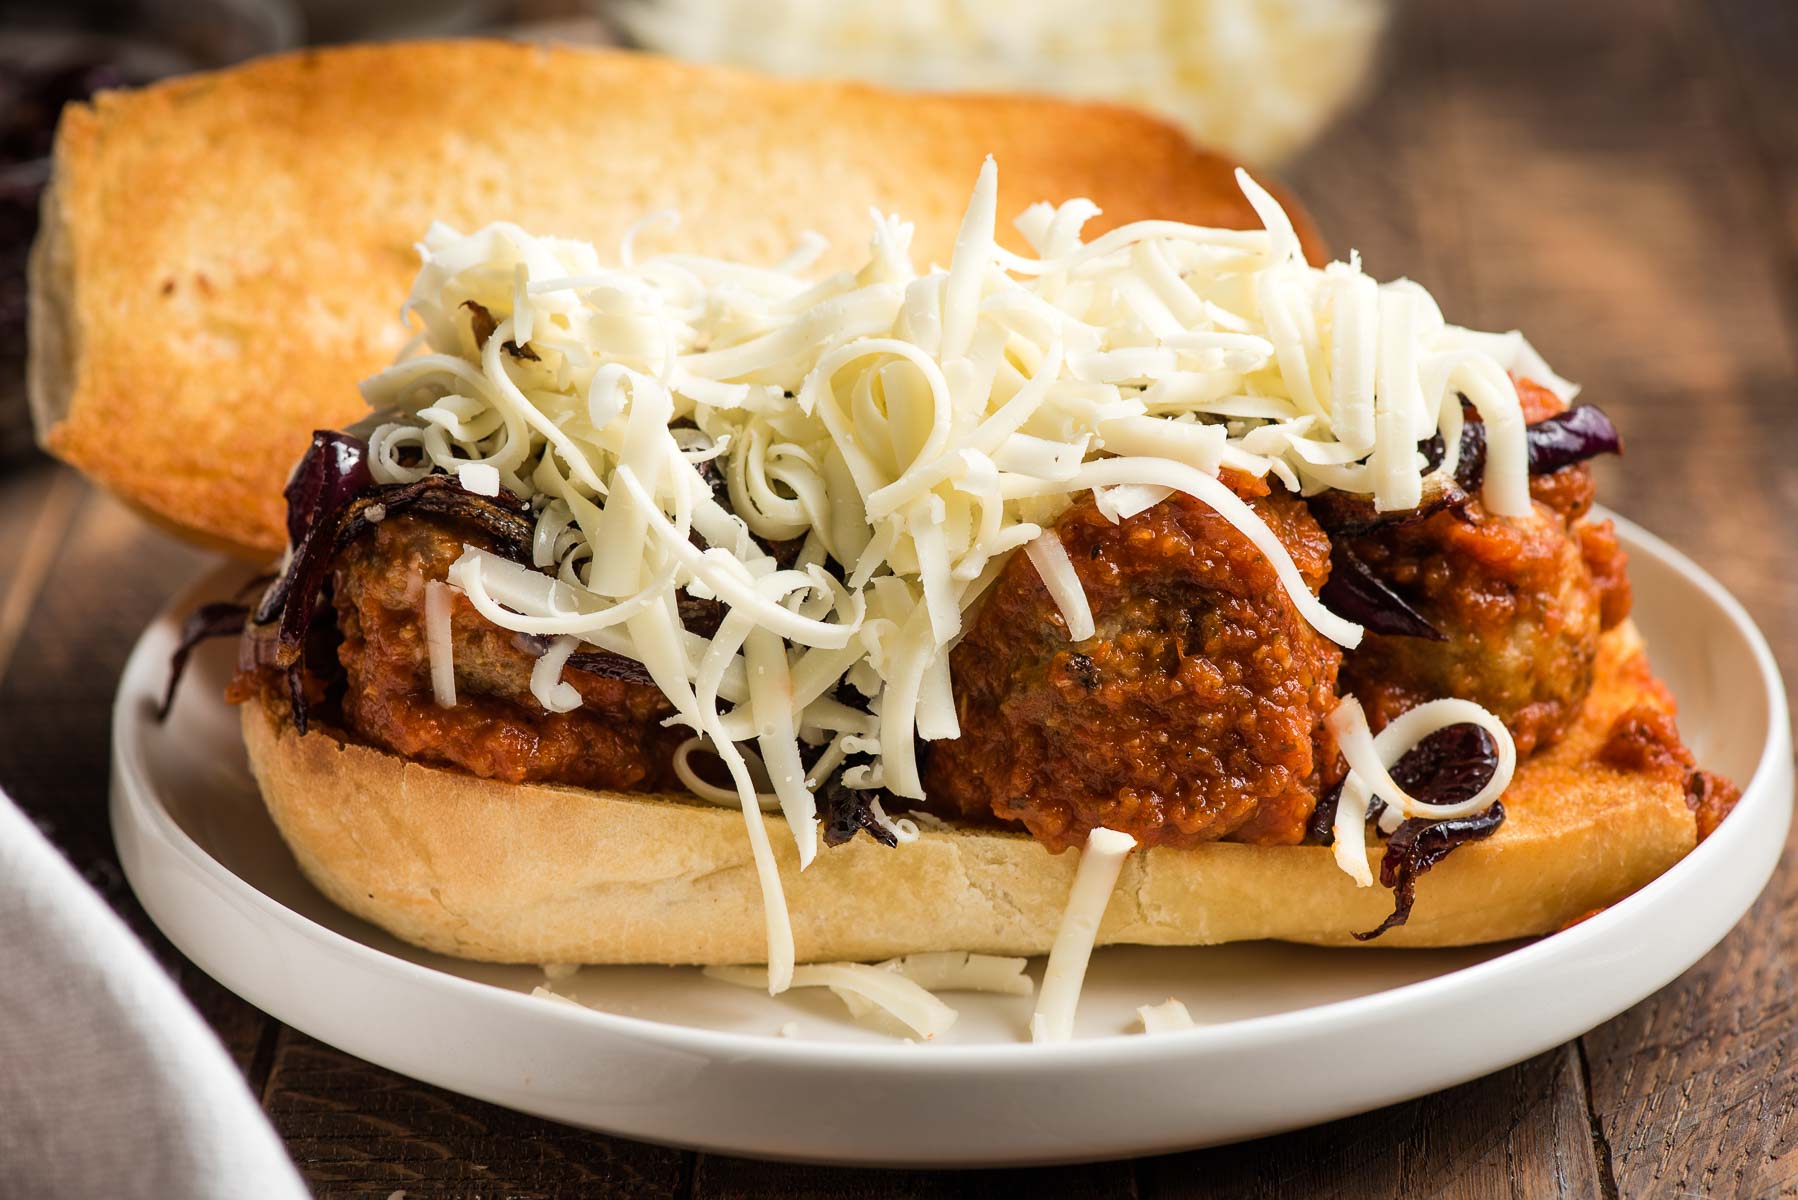 Assembling a meatball sub on a plate.